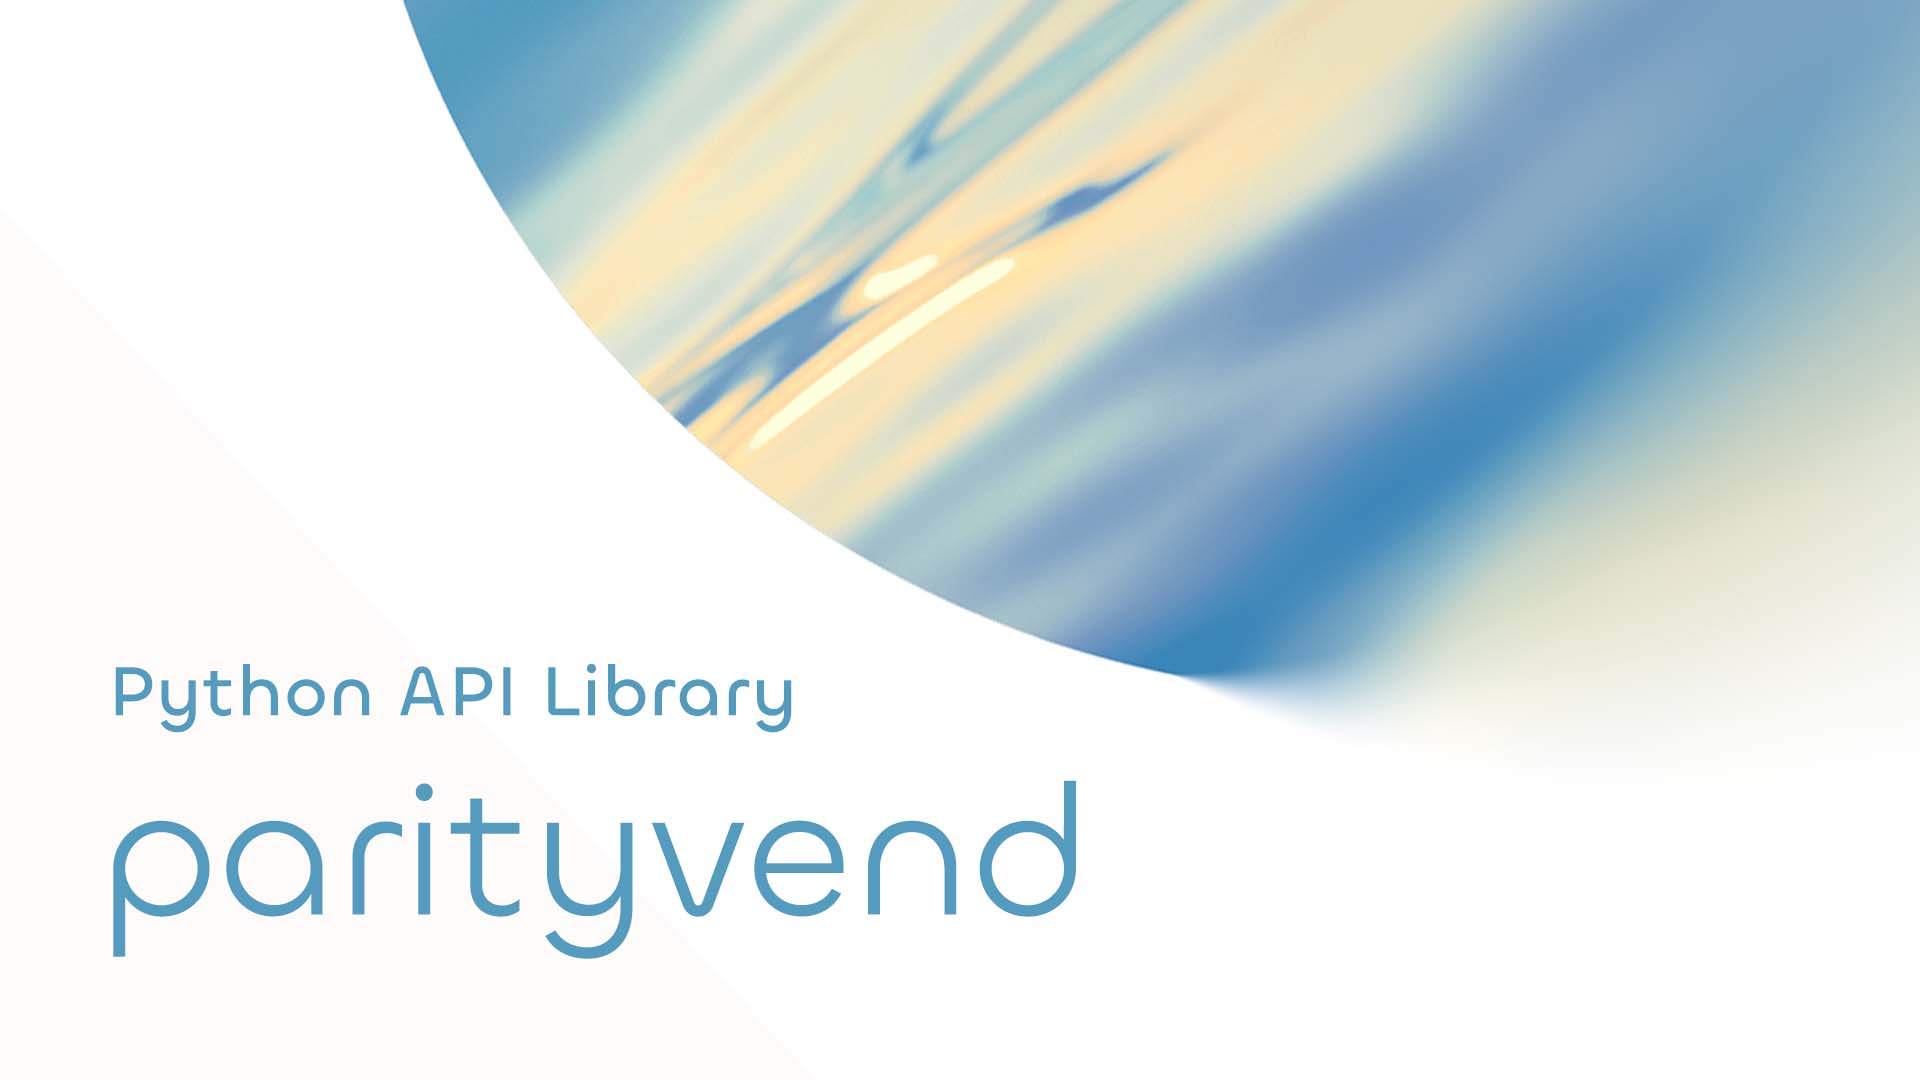 ParityVend: ParityVend Releases Free Open-Source Python Library for Smart Pricing